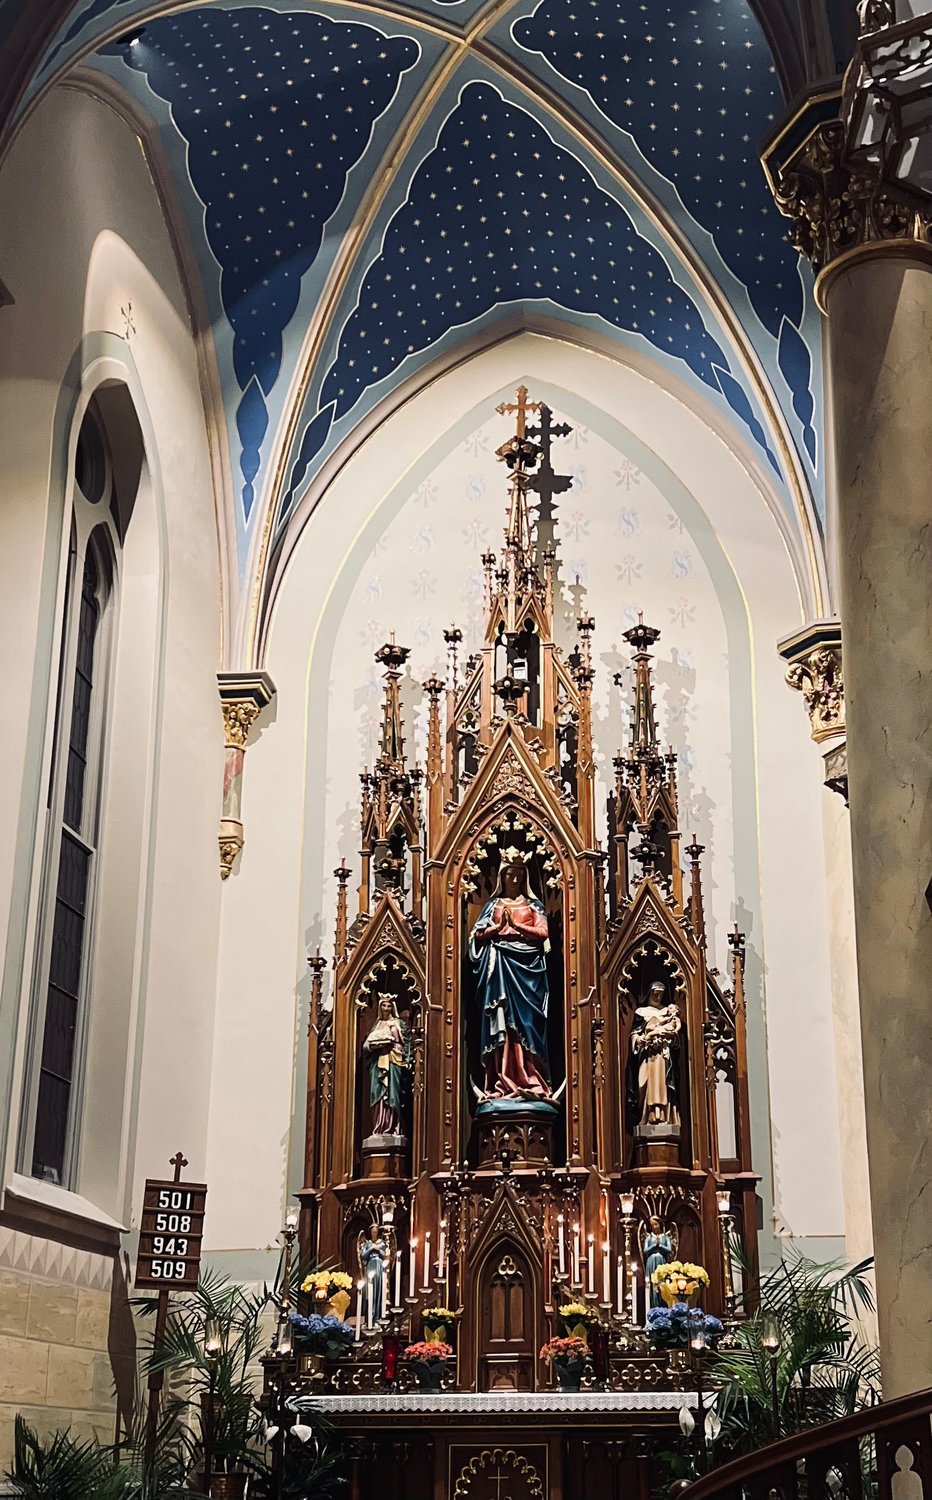 The altar of repose in St. Peter Church in Jefferson City.